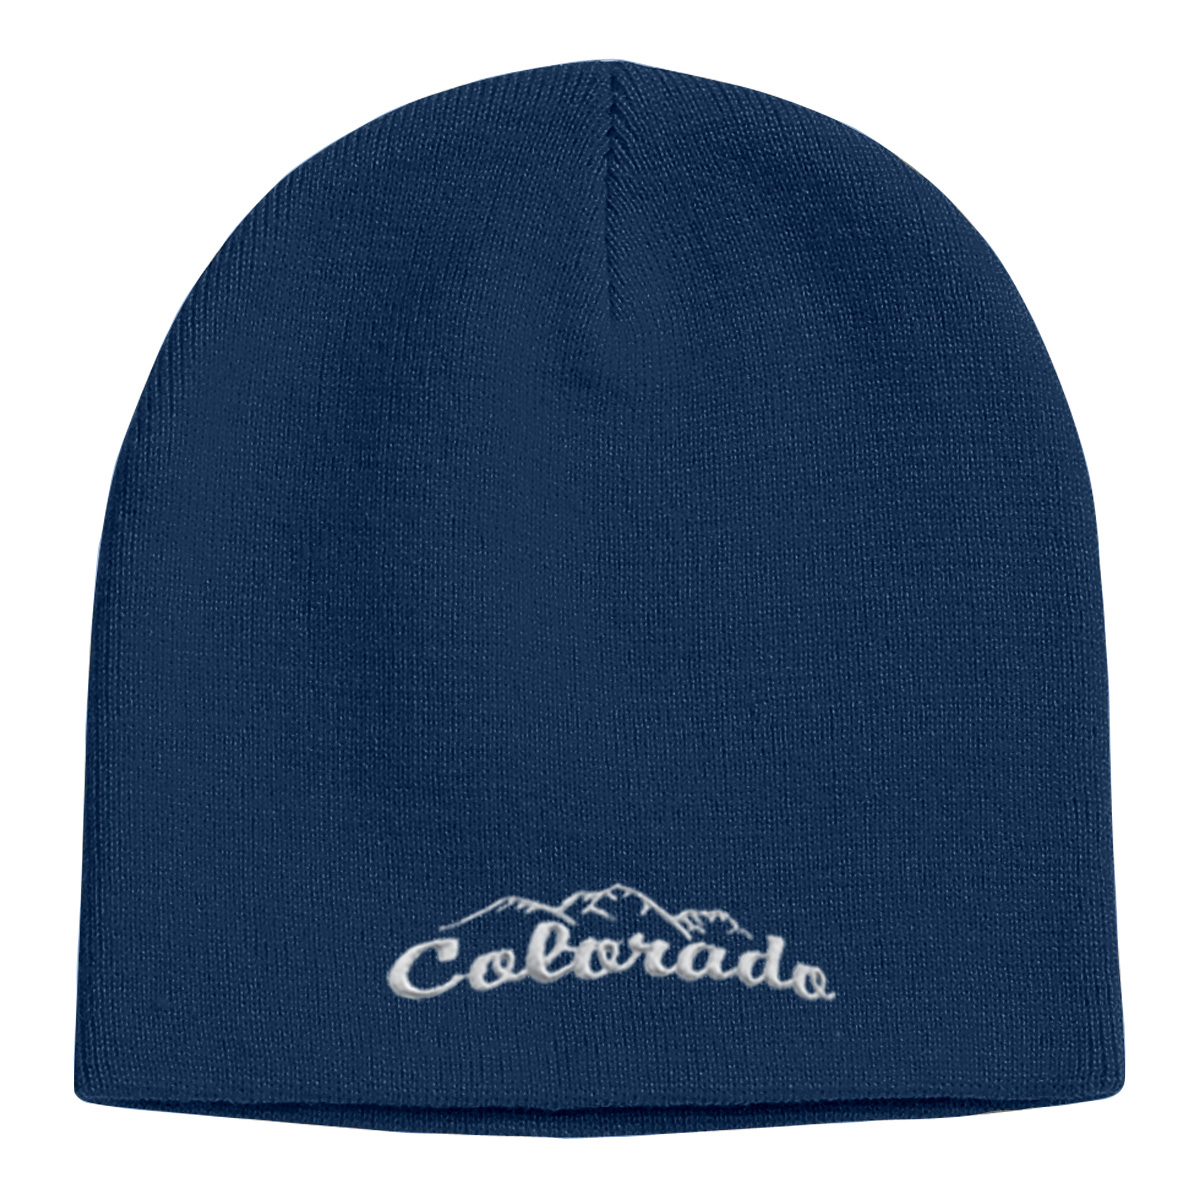 #1075 Knit Beanie Cap - Hit Promotional Products